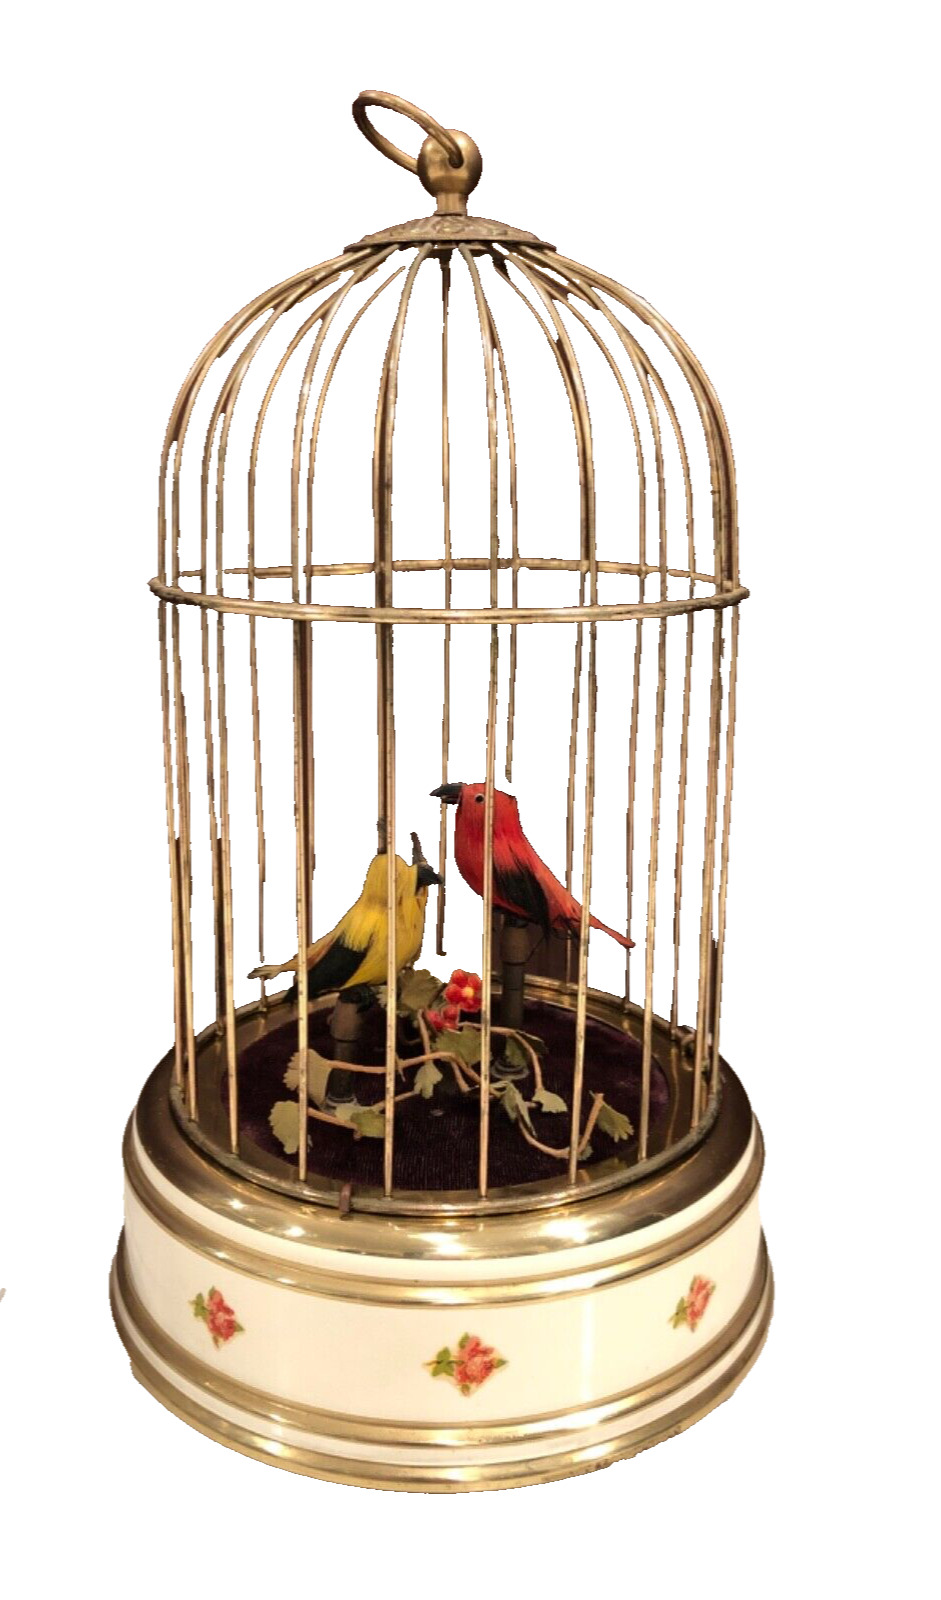 Eschle Germany 2 Bird Wind Up Animated in Brass Enamel Cage Vintage